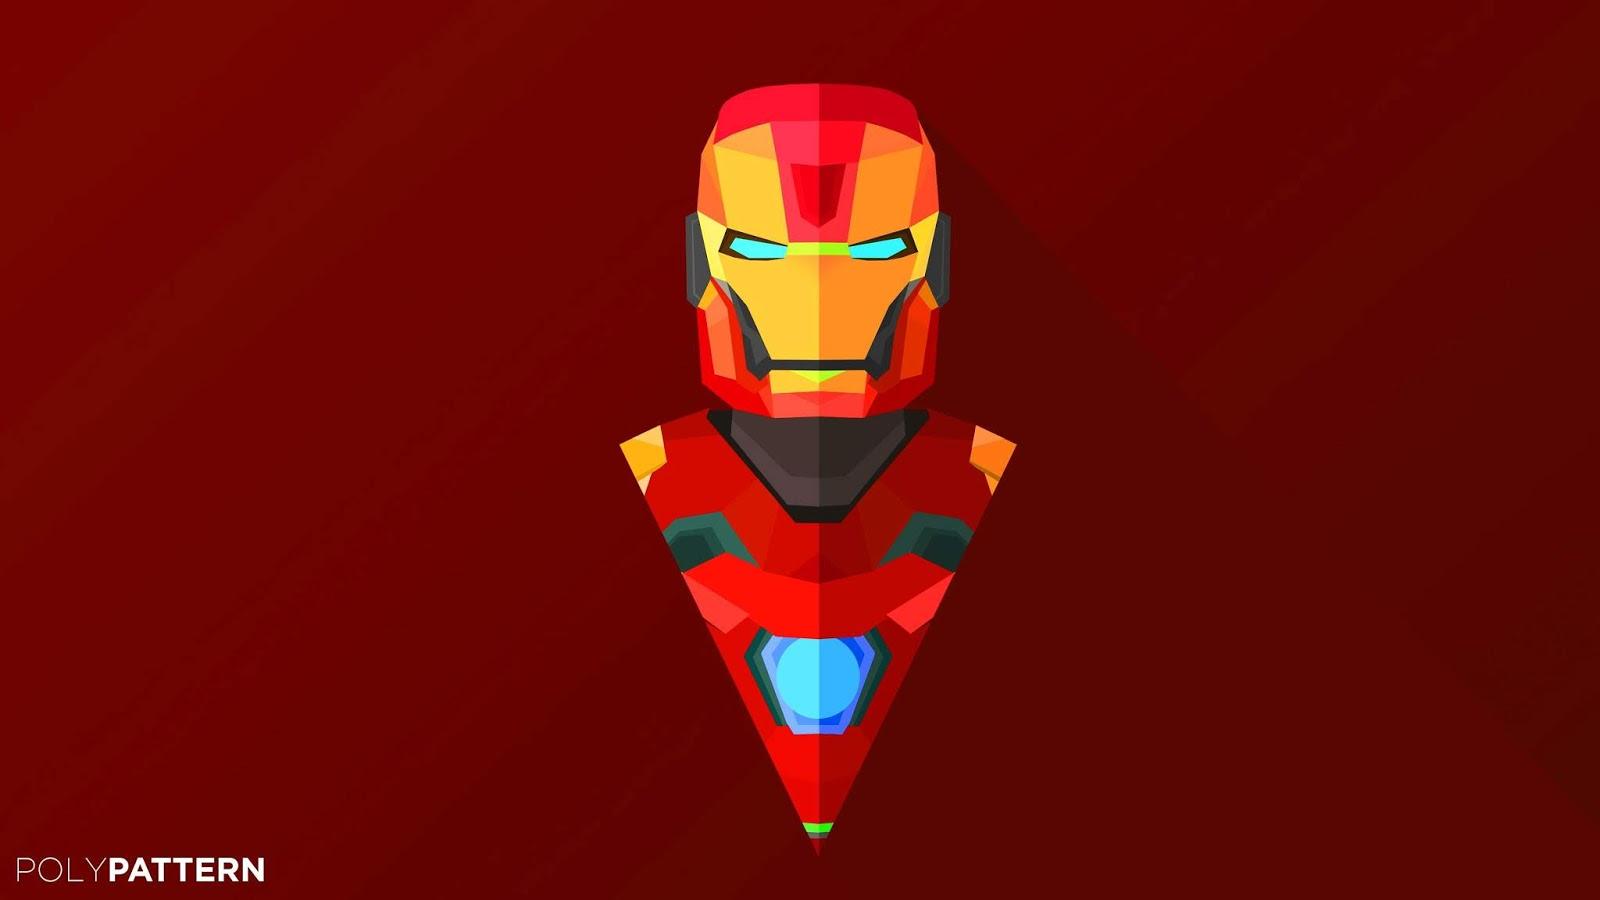 Iron Man Image, Photo, Wallpaper & Picture BEST